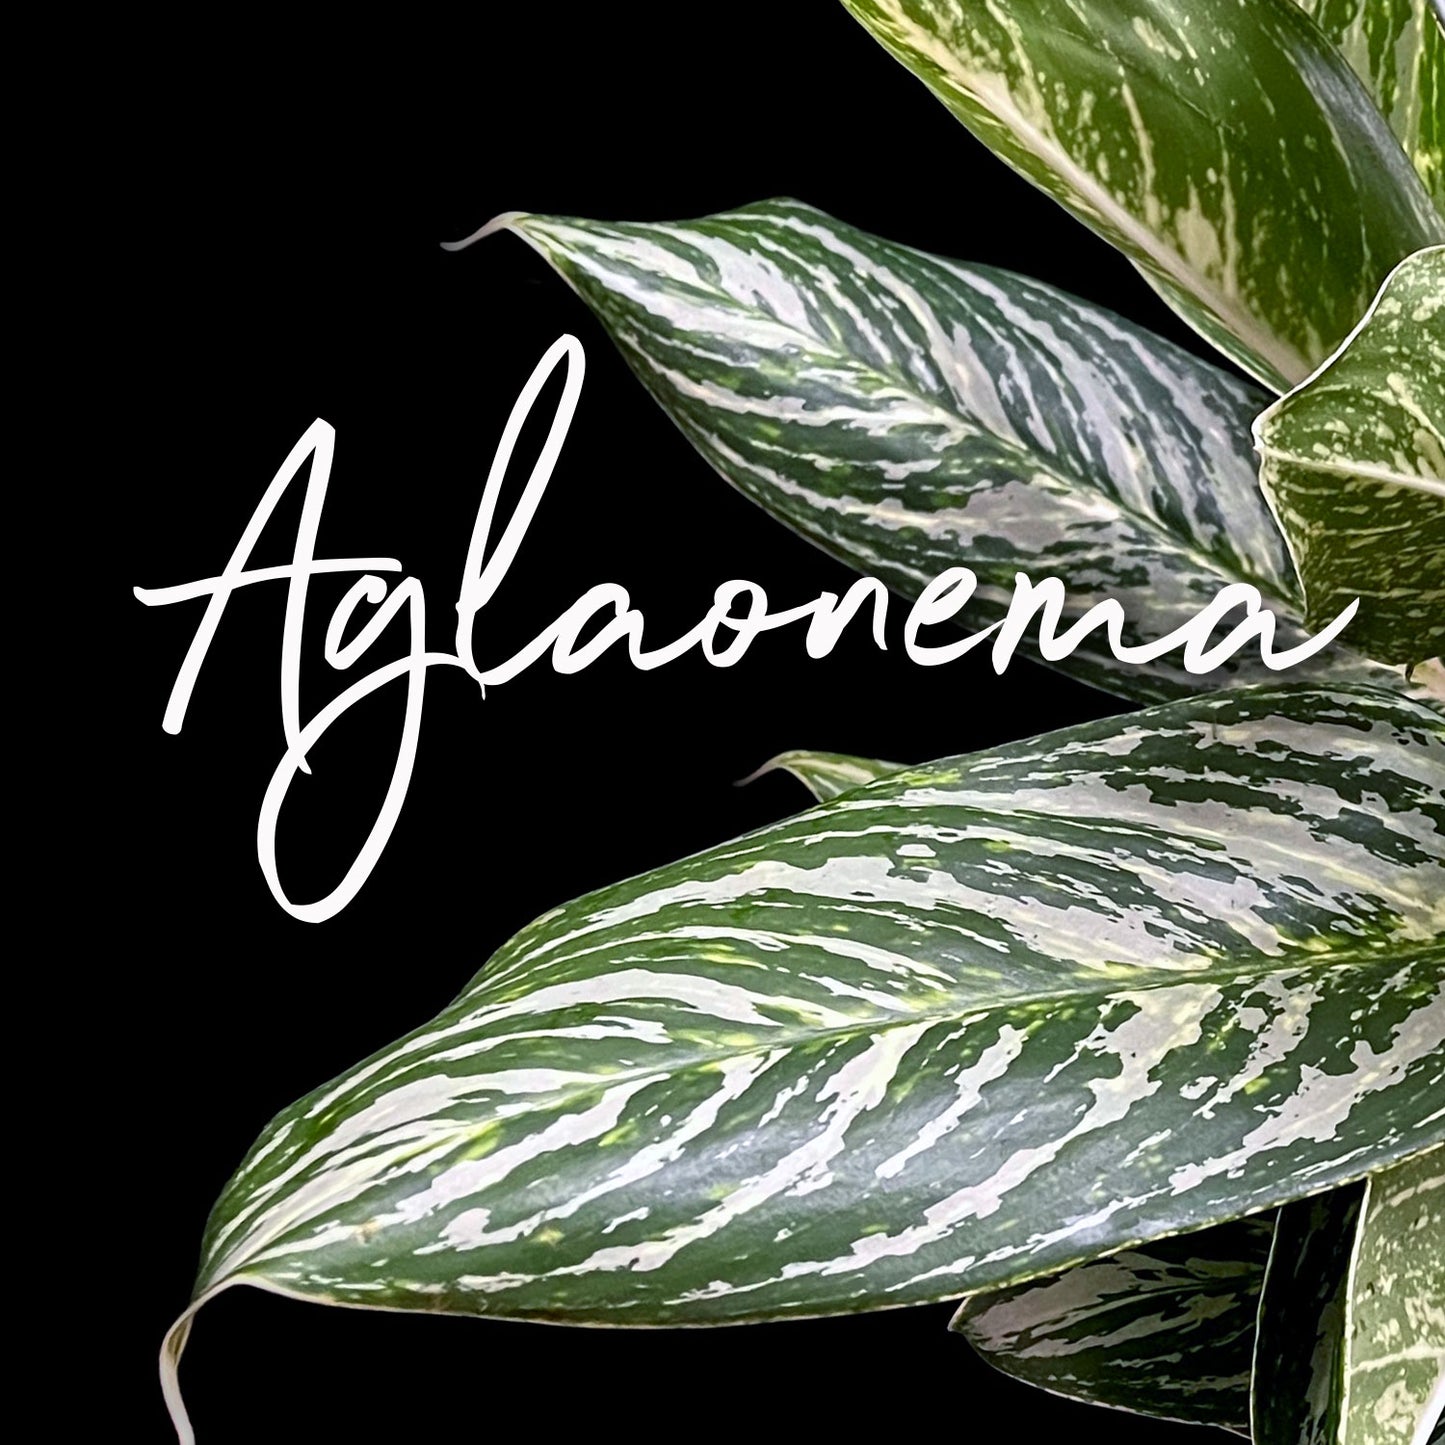 View of Aglaonema leaves. The leaves are vibrant and detailed, with a mix of green and creamy white colors creating intricate patterns. Order online for plants & flowers from the best florist in Toronto near you.